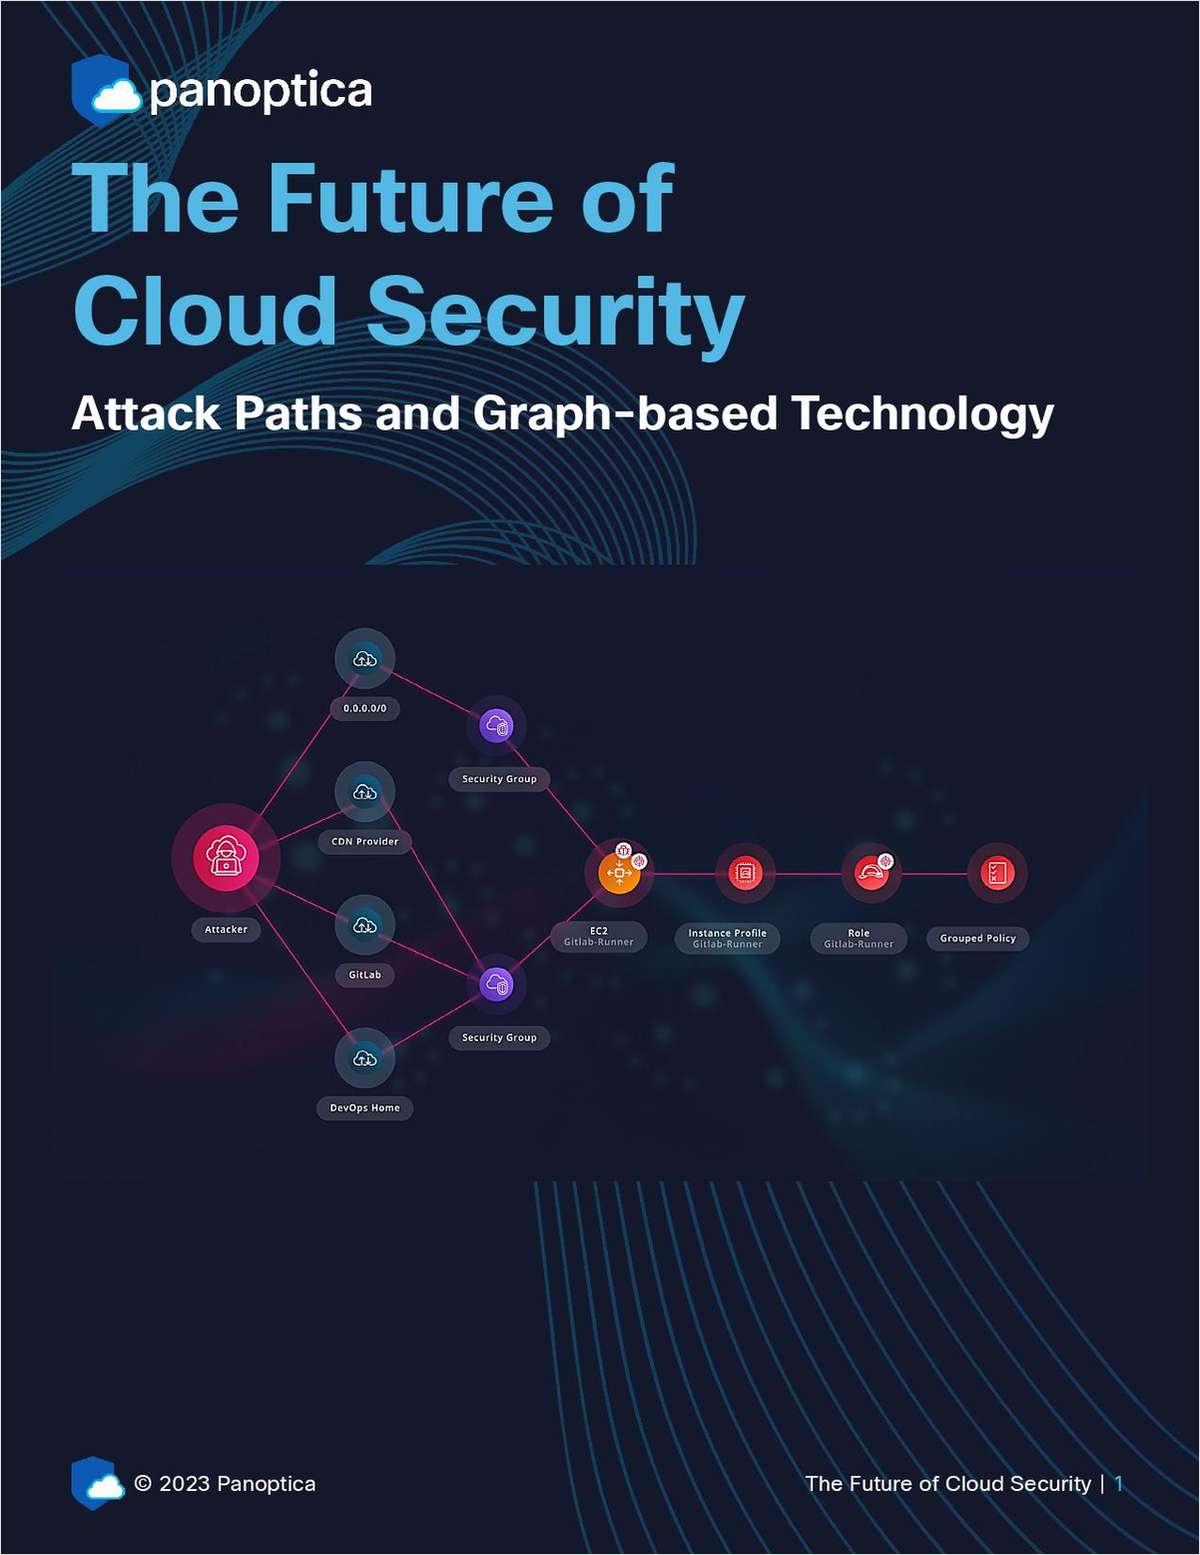 The Future of Cloud Security: Attack Paths and Graph-based Technology